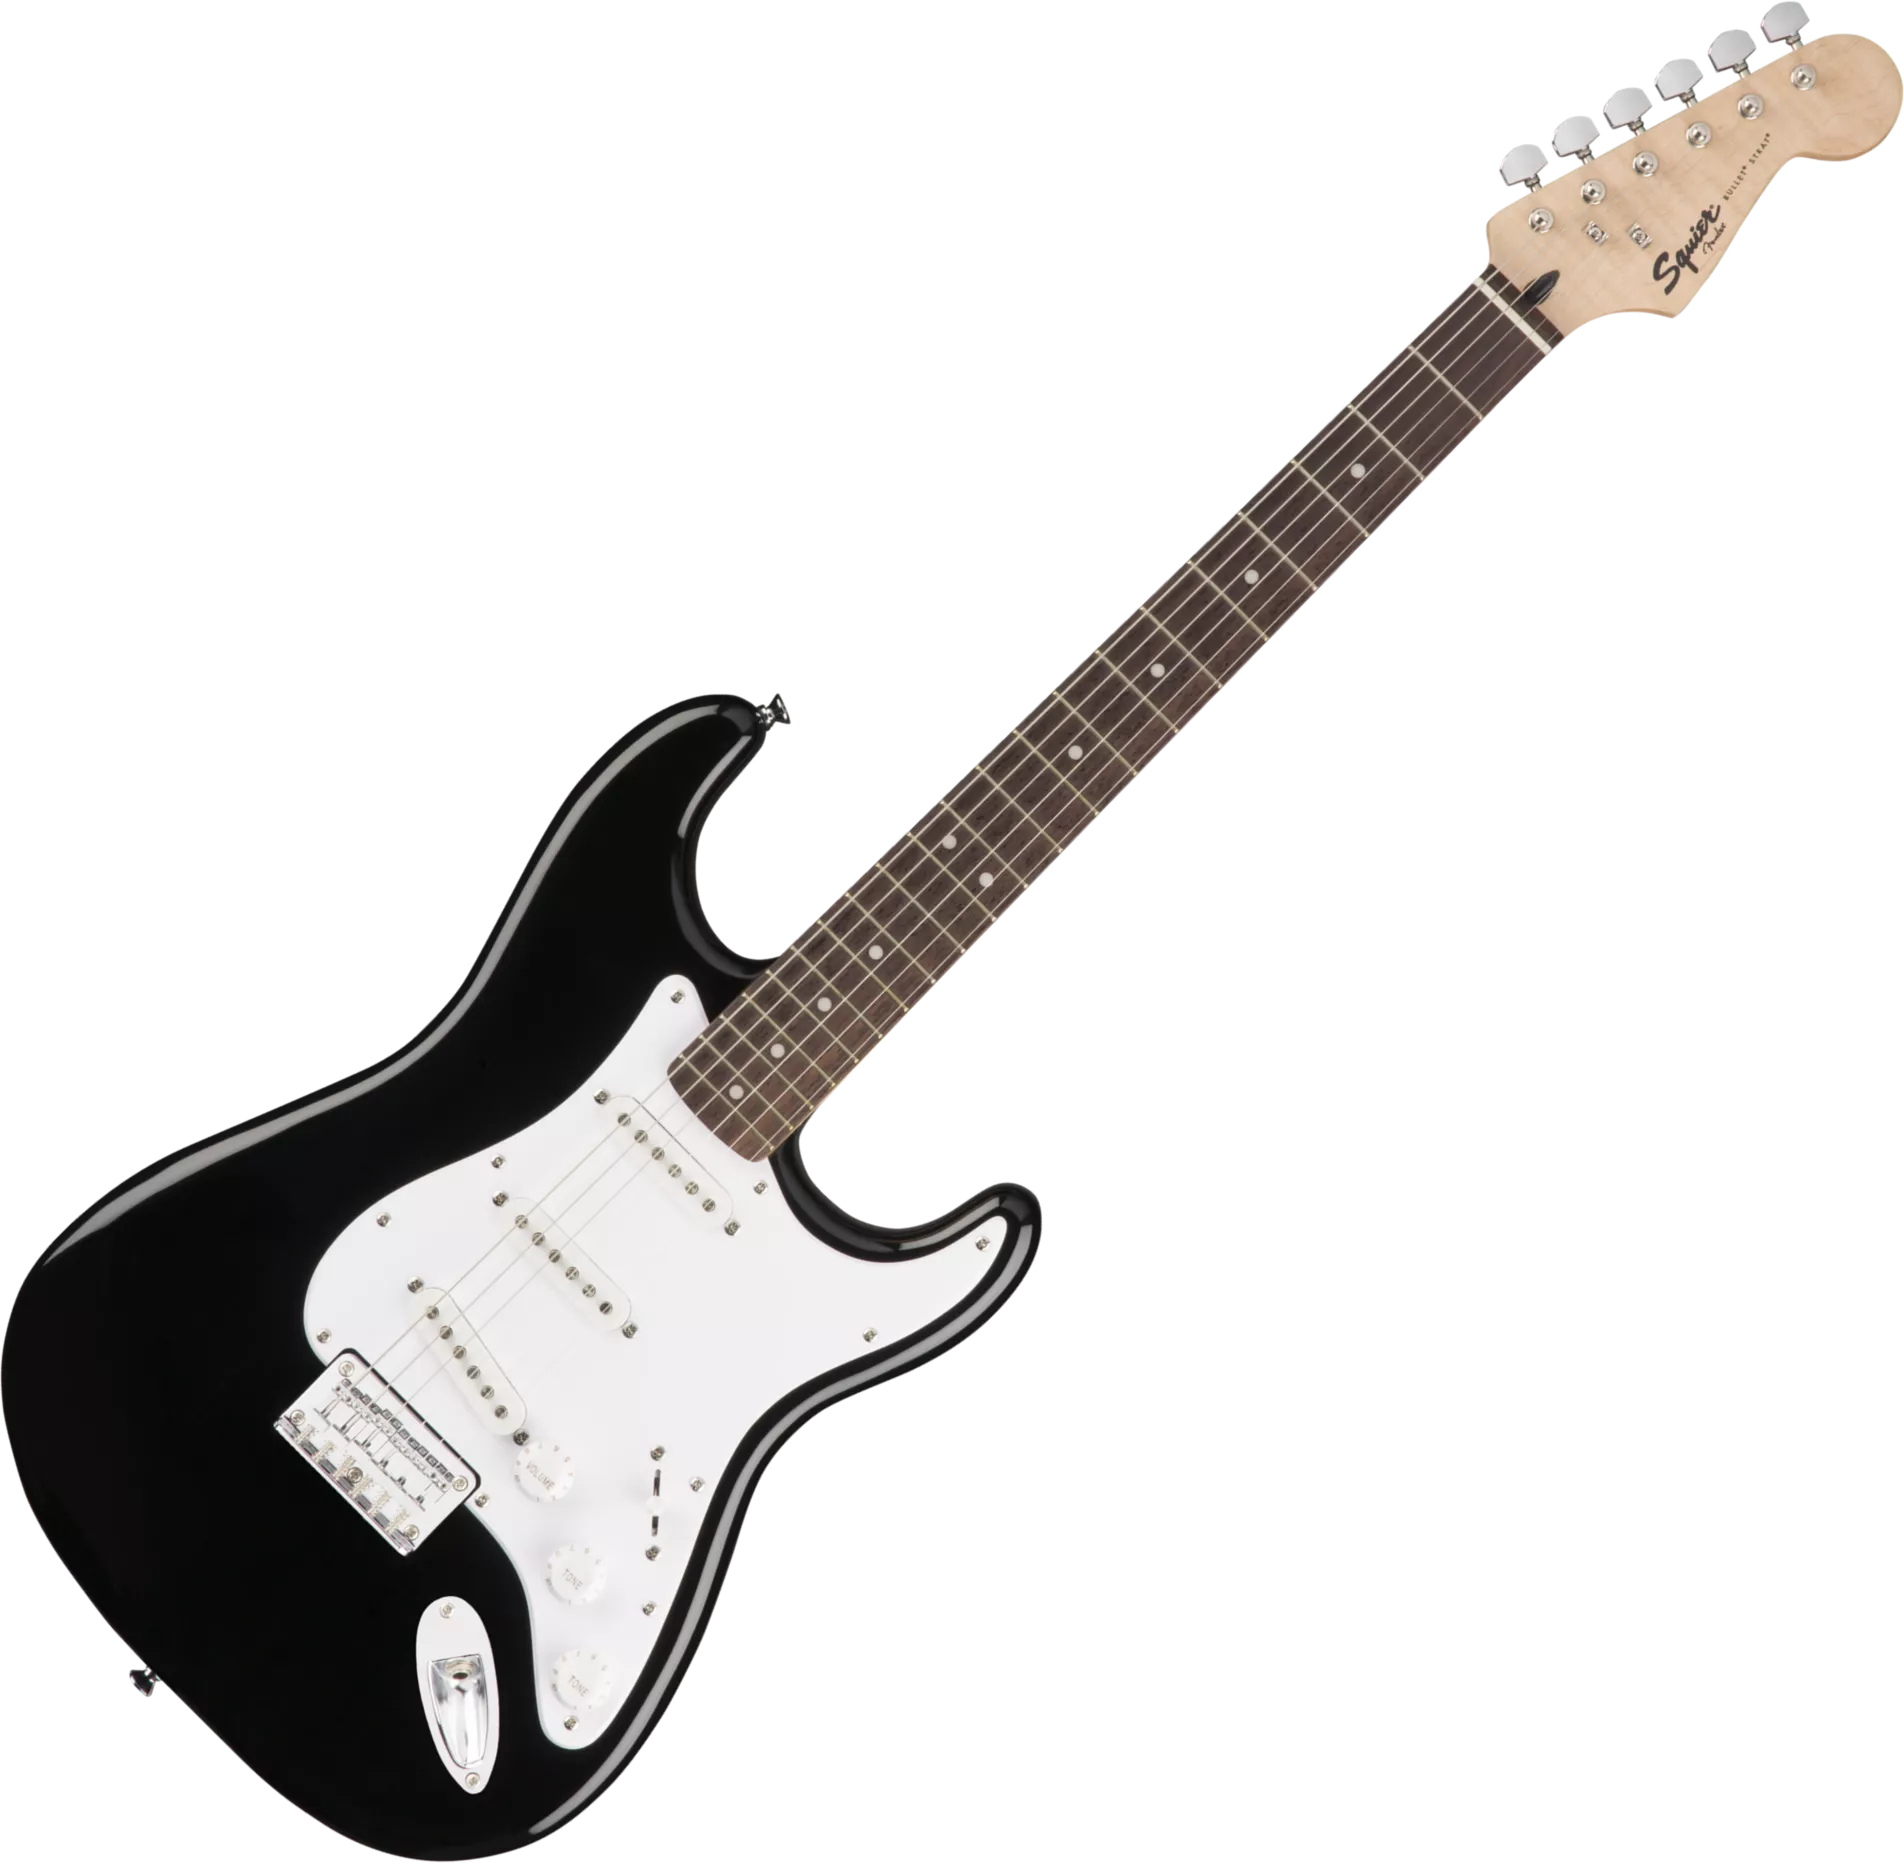 Squier by Fender Bullet Stratocaster - エレキギター